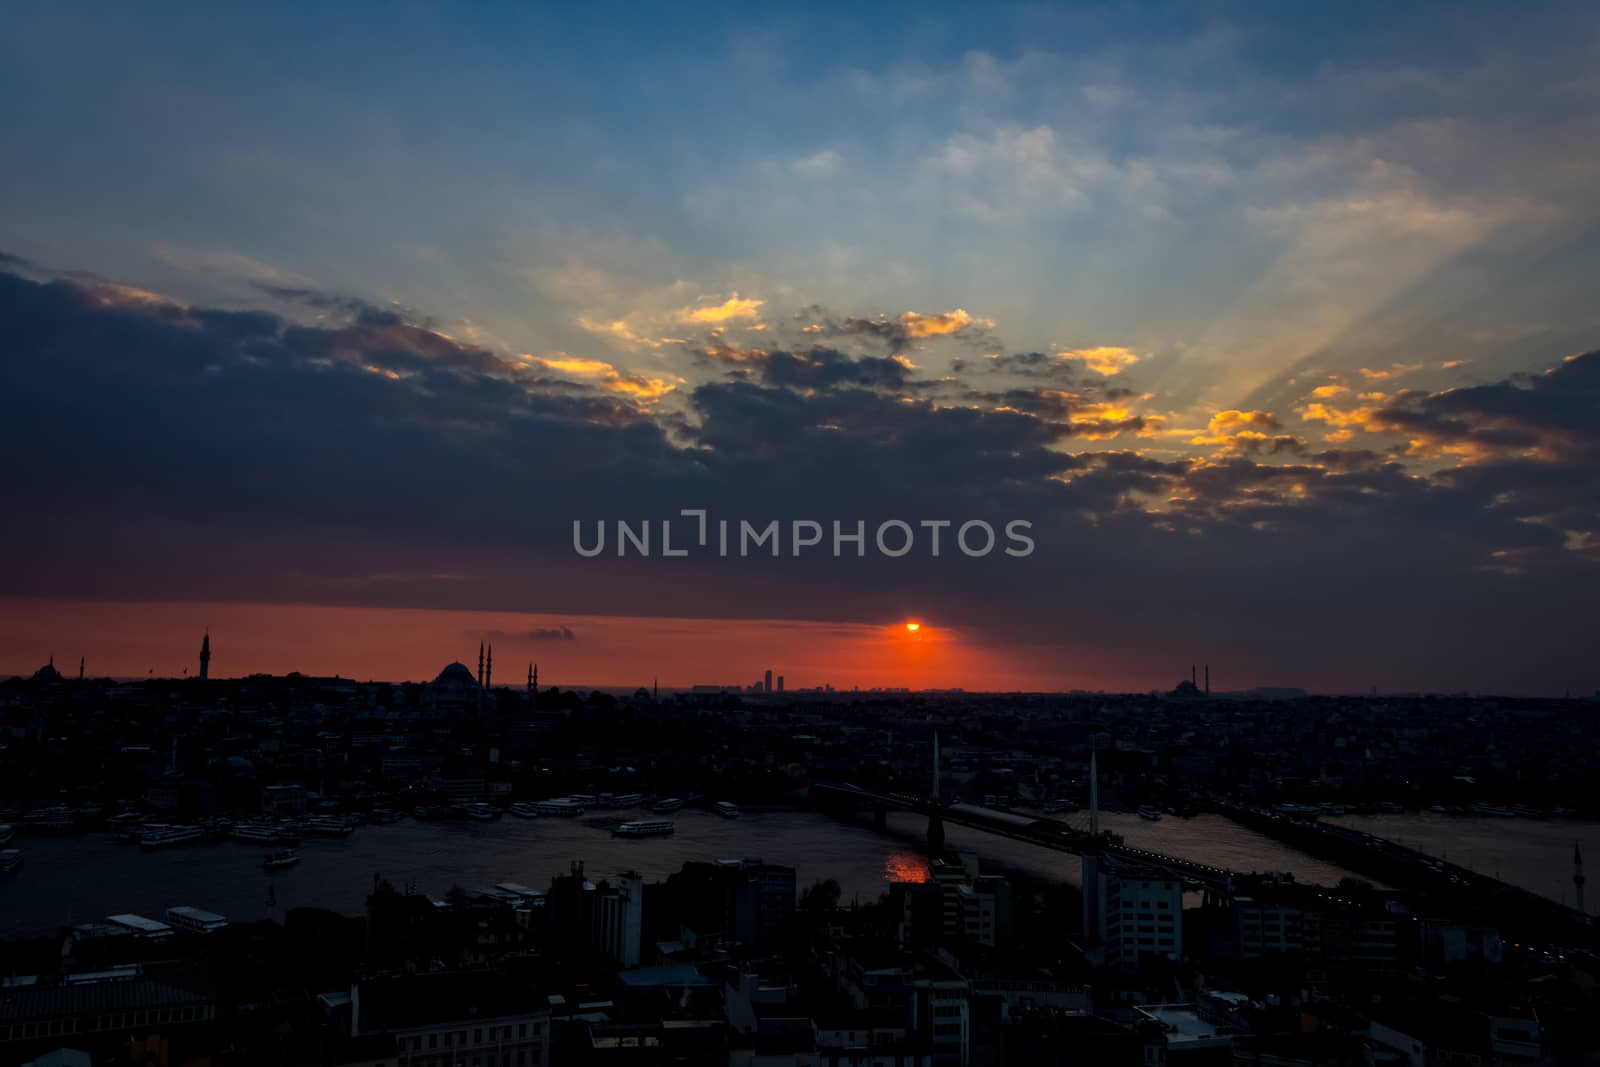 istanbul cityscape looking from the Galata Tower at sunset